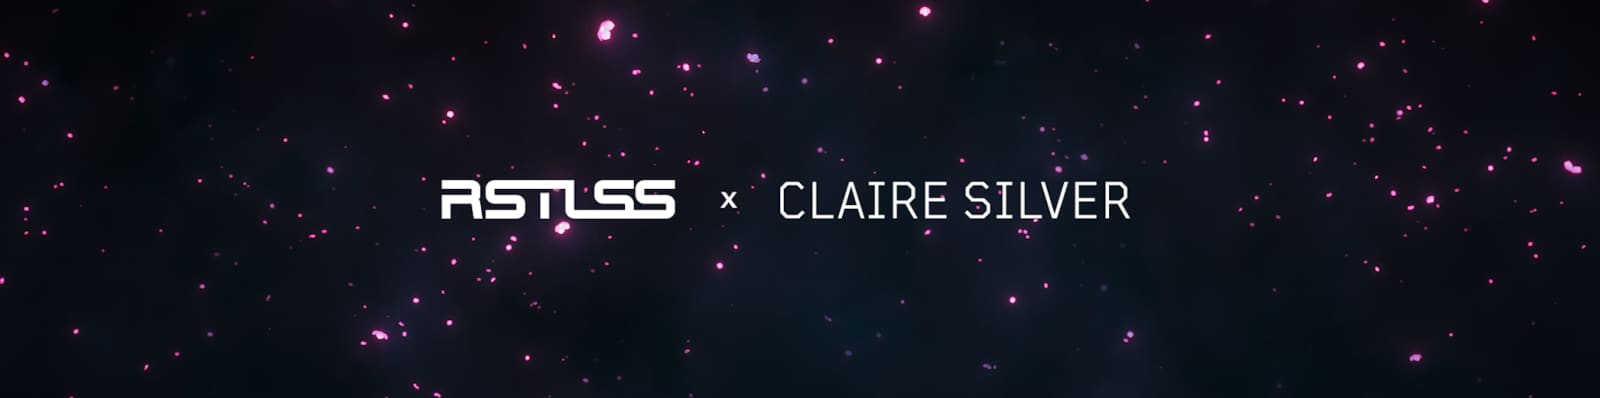 RSTLSS x Claire Silver